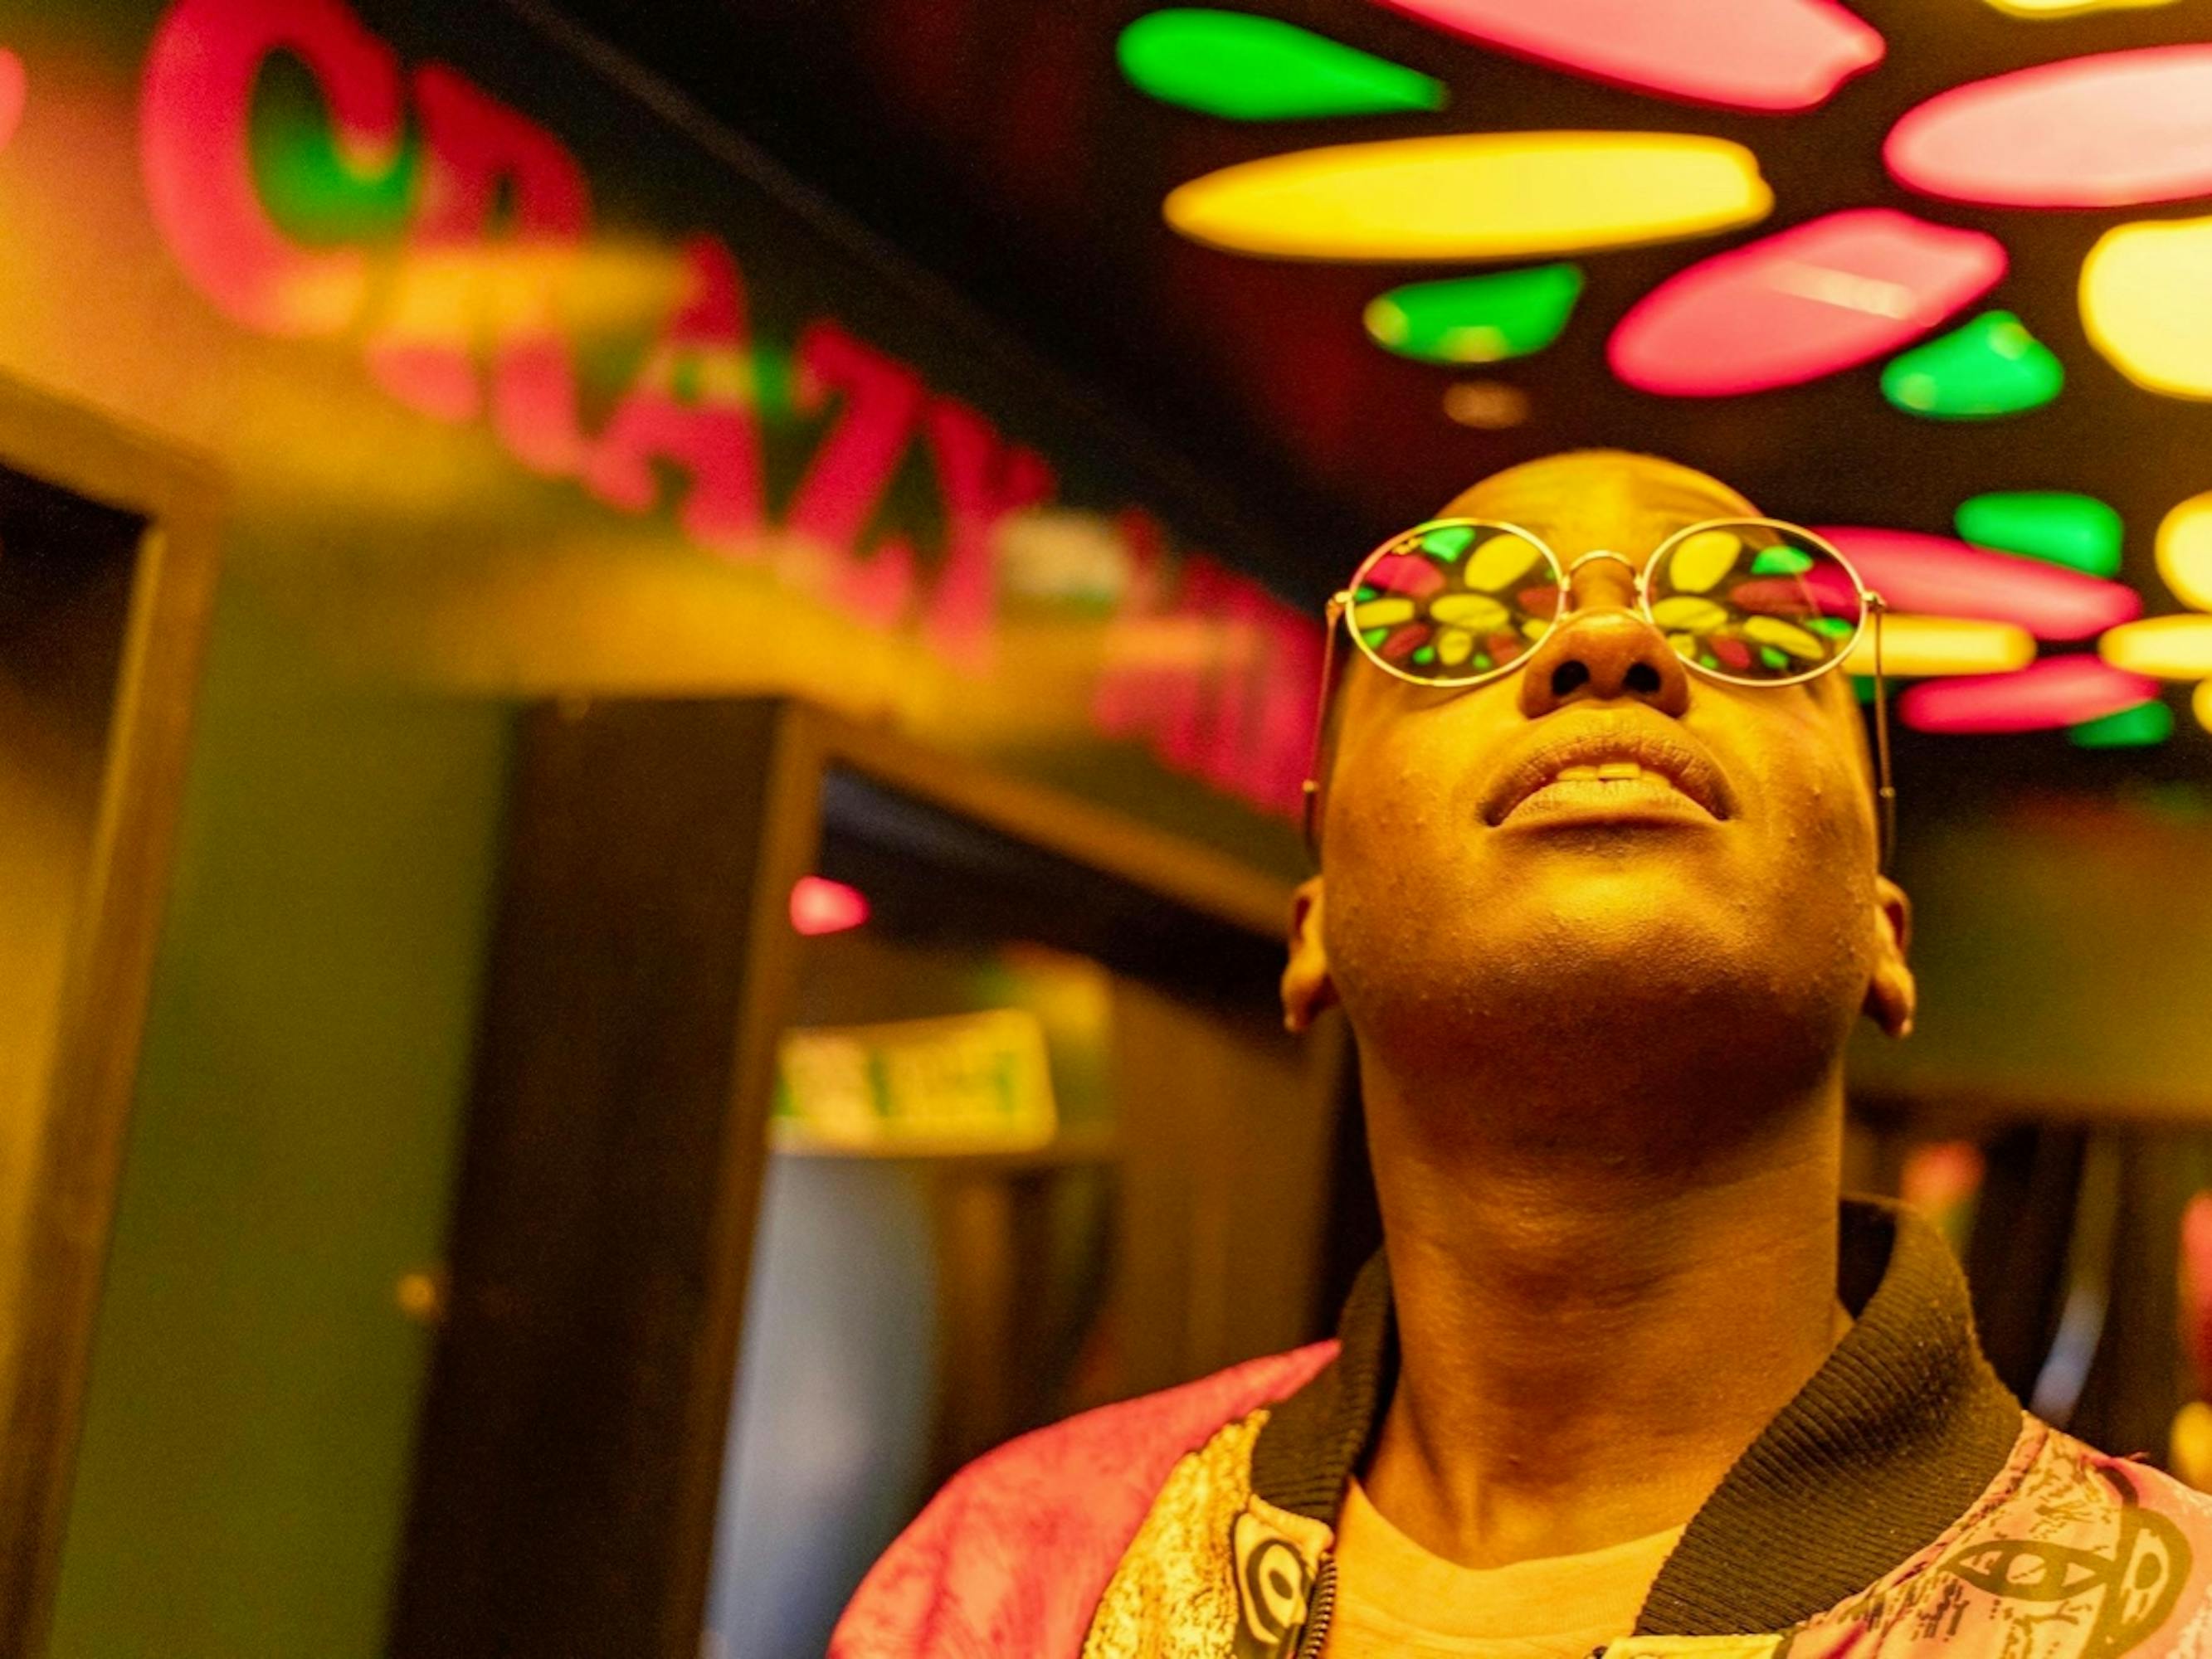 Eric Effiong (Ncuti Gatwa) wears round glasses that reflect the colorful lights that are being projected onto the ceiling. In the background reads “Crazy” in red font.